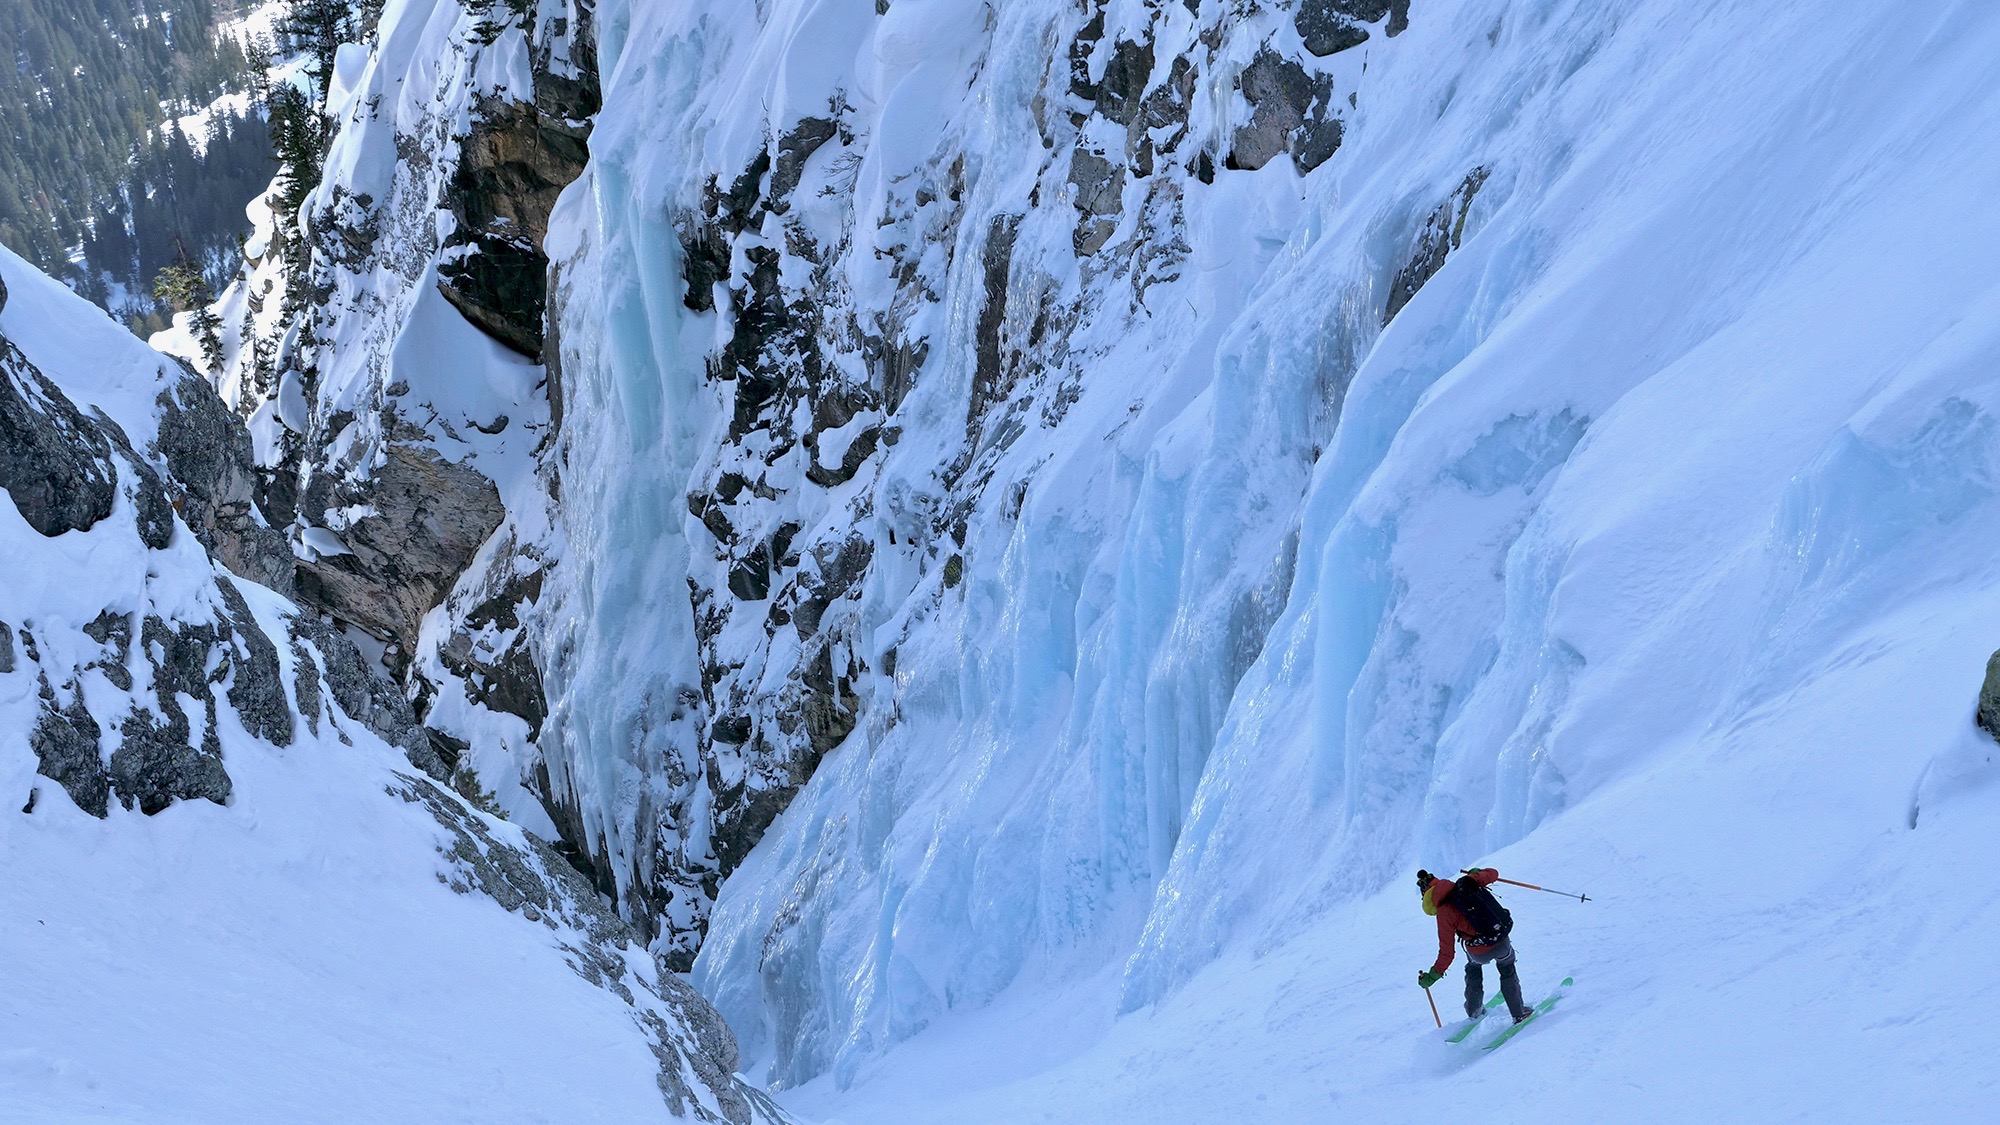 The classic Apocalypse couloir, challenging conditions-- the F1 LT was up to the task.